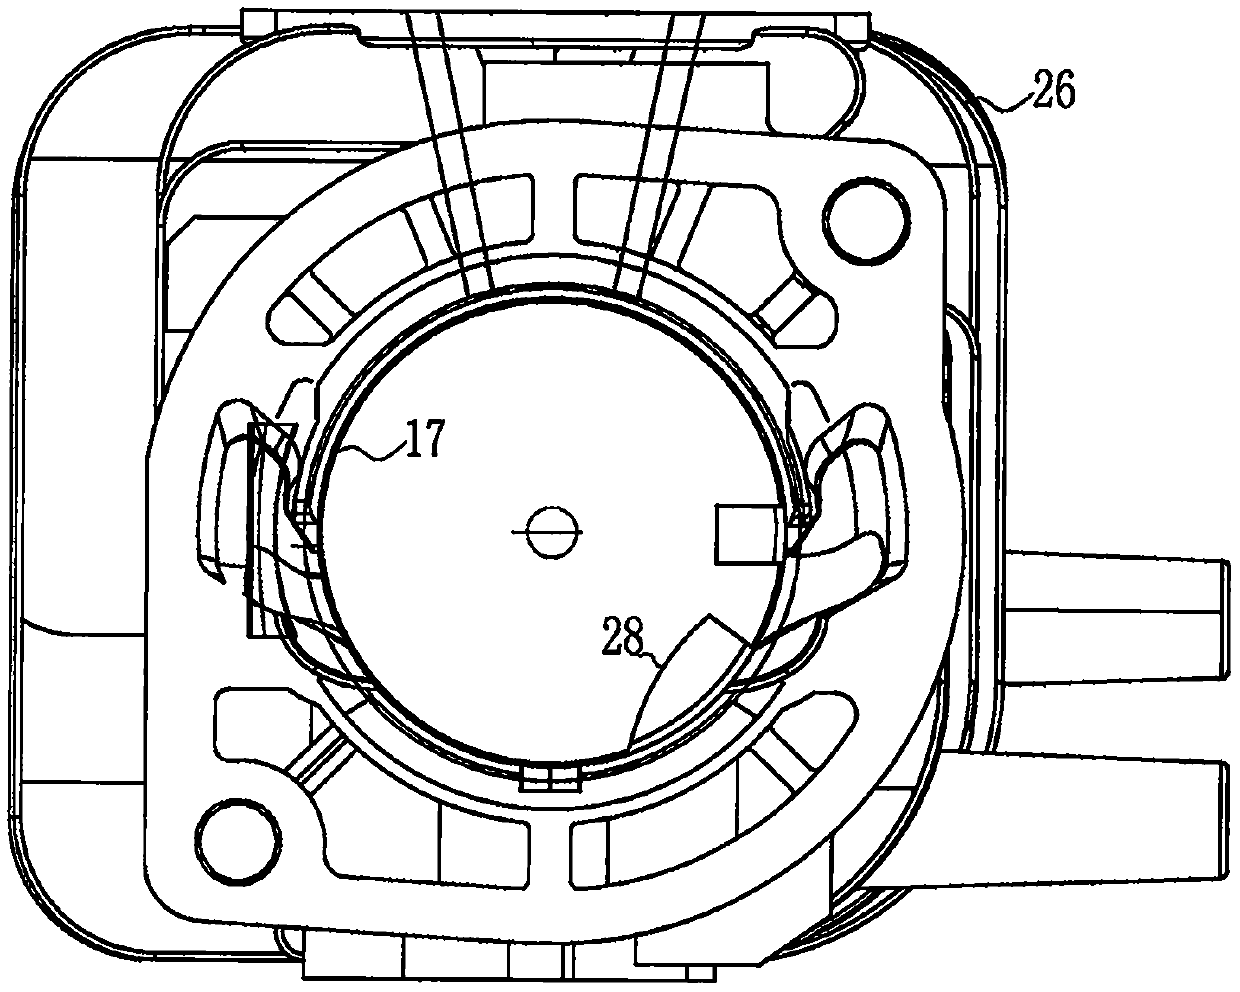 Riding mower with front-mounted steering wheel at mower head